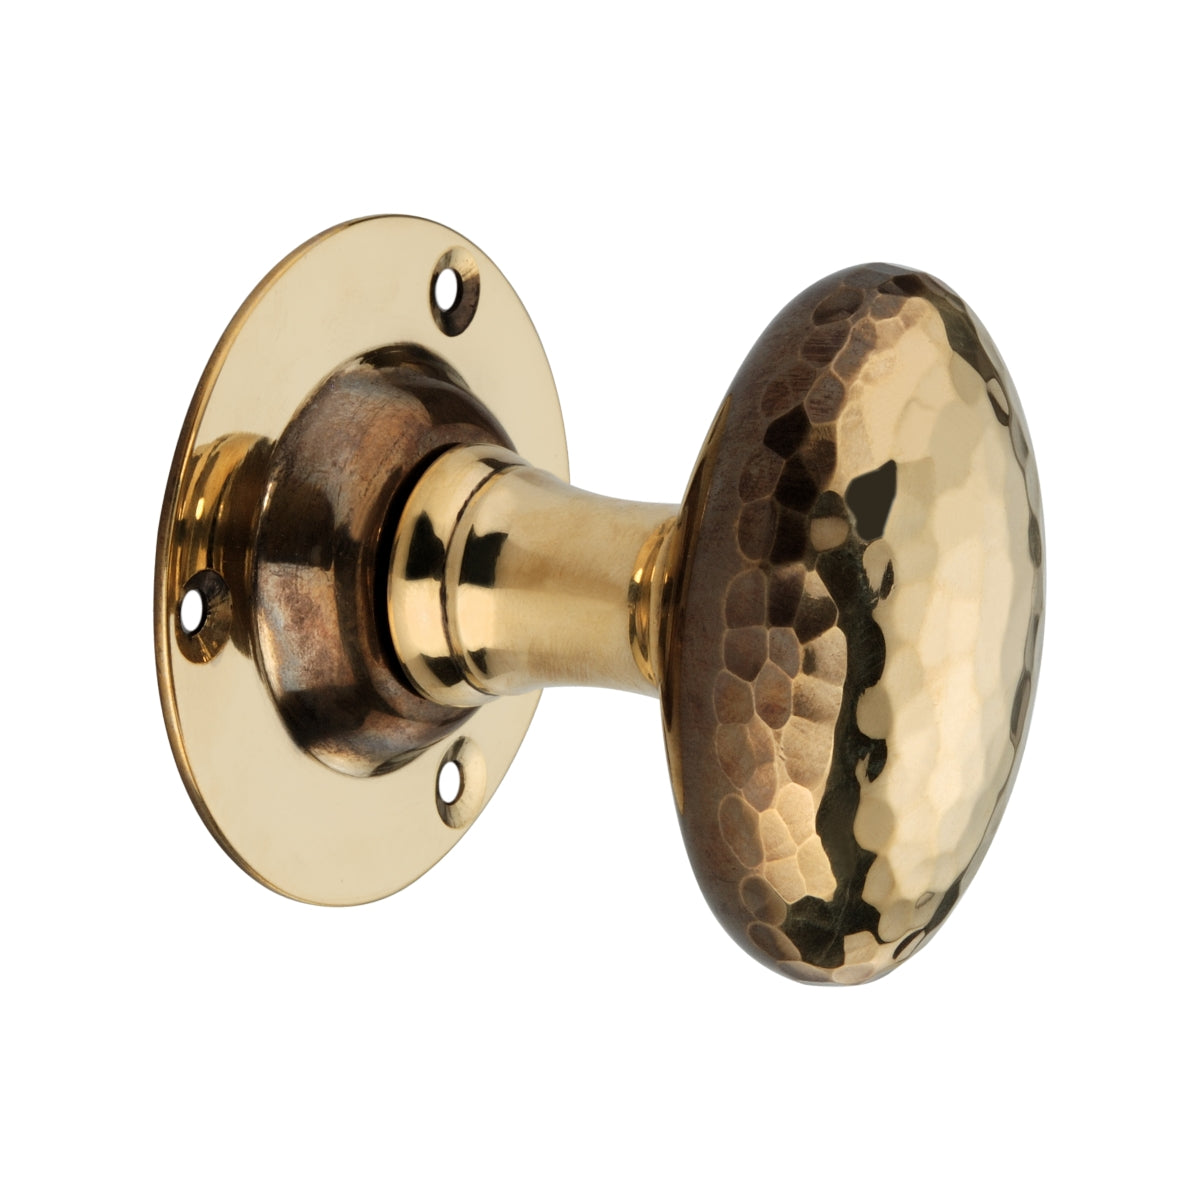 Hammered Oval Mortice Door Knob Aged Brass